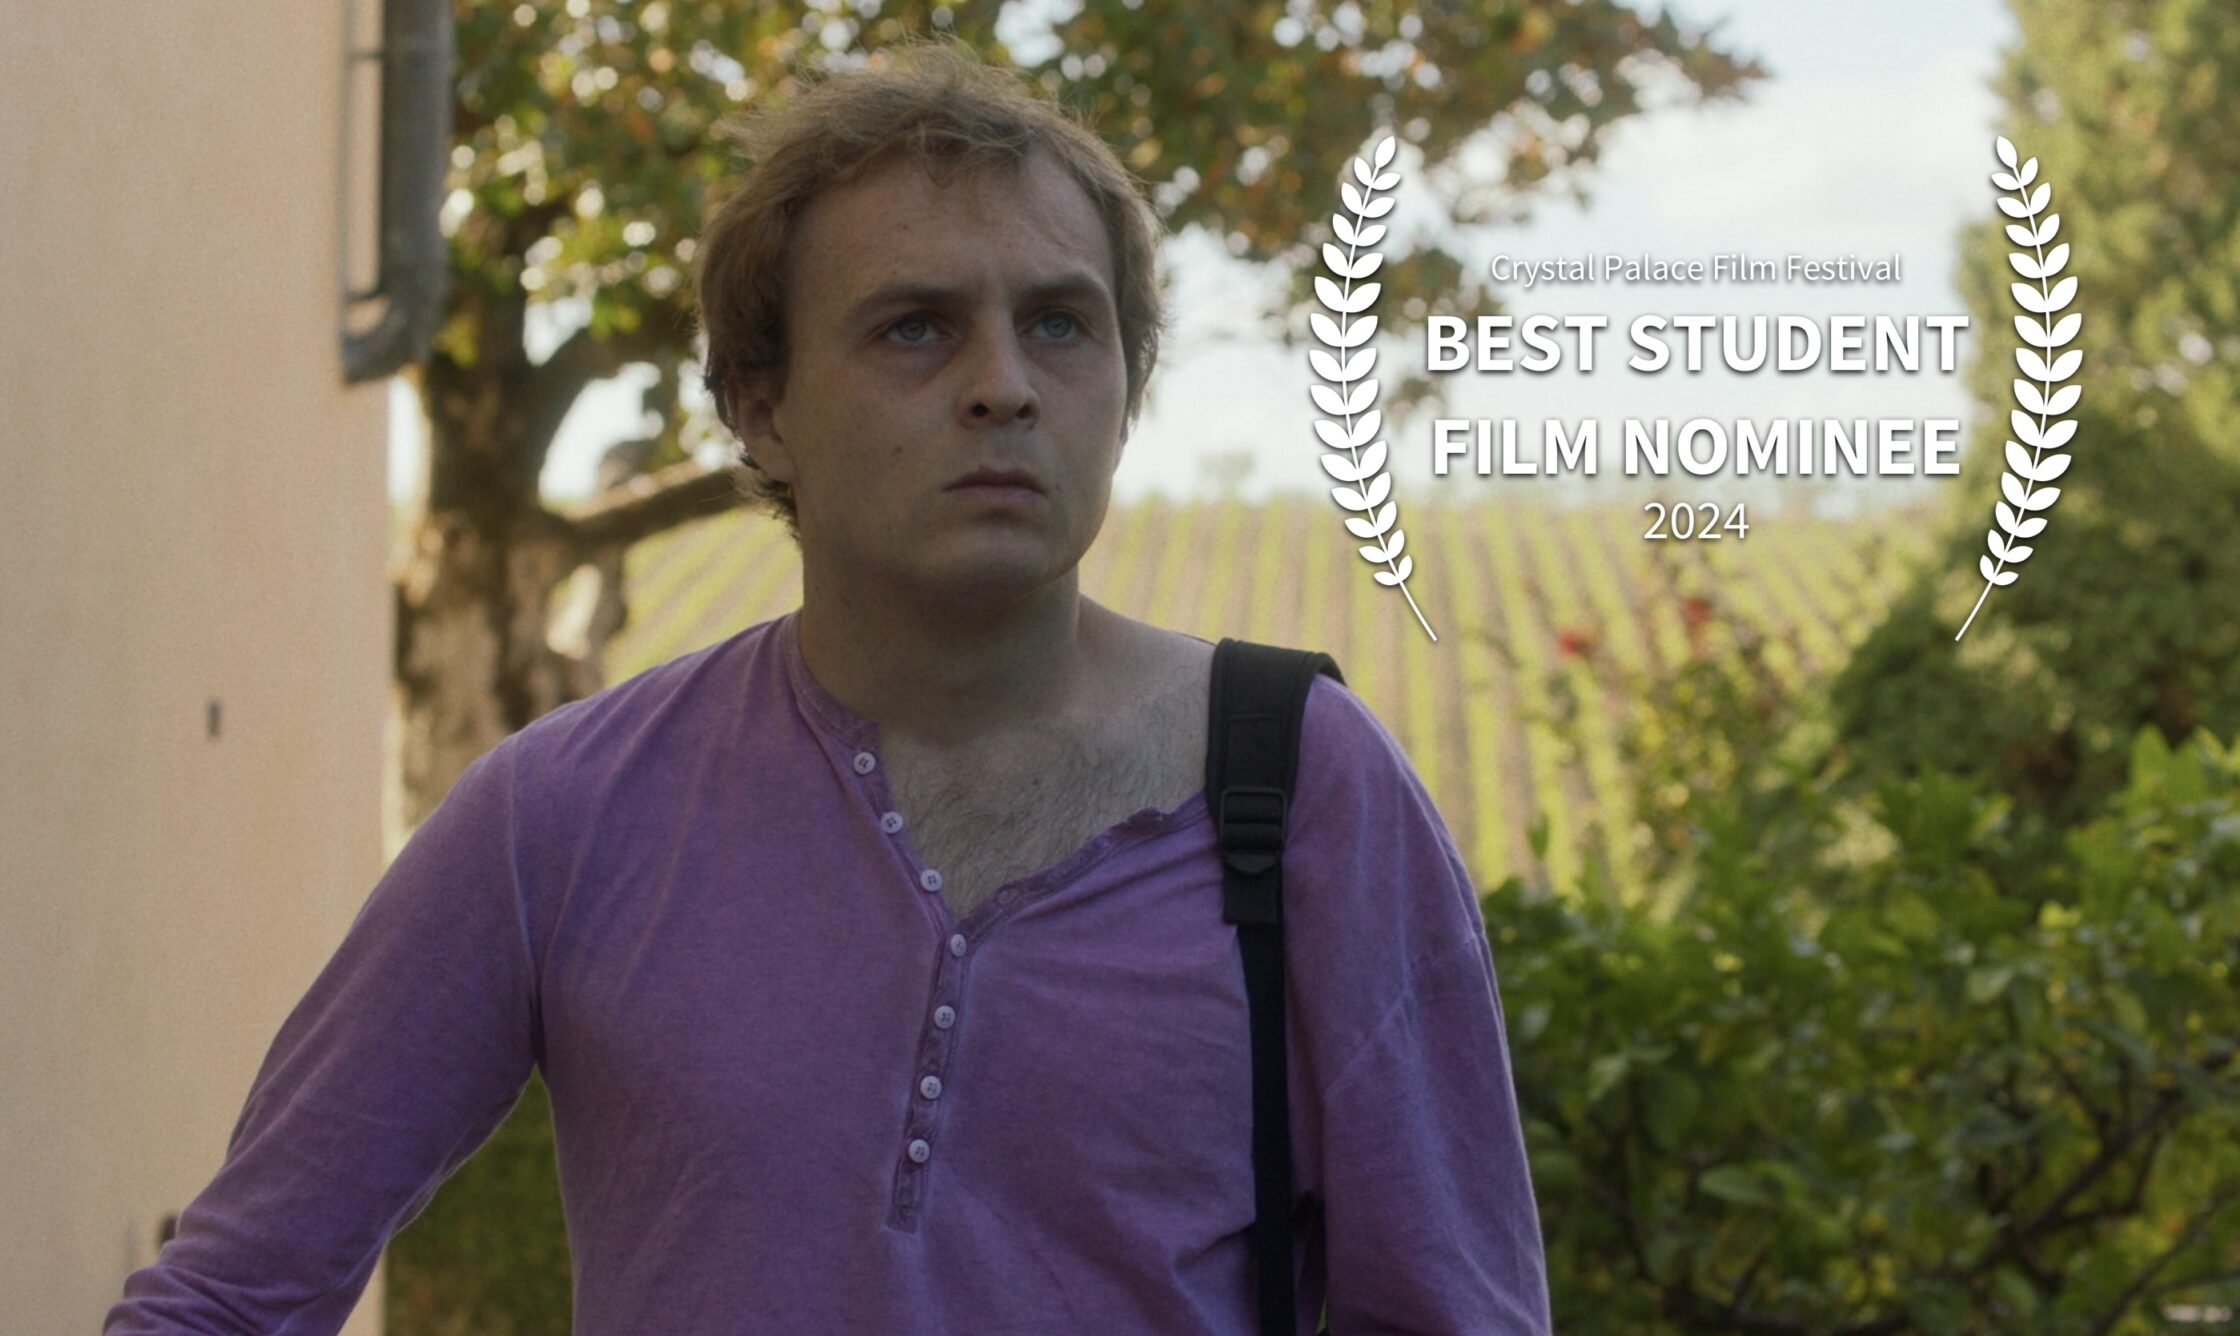 “Lo Sguardo (The Look)” nominated in BEST STUDENT FILM category at next “Crystal Palace Film Festival”